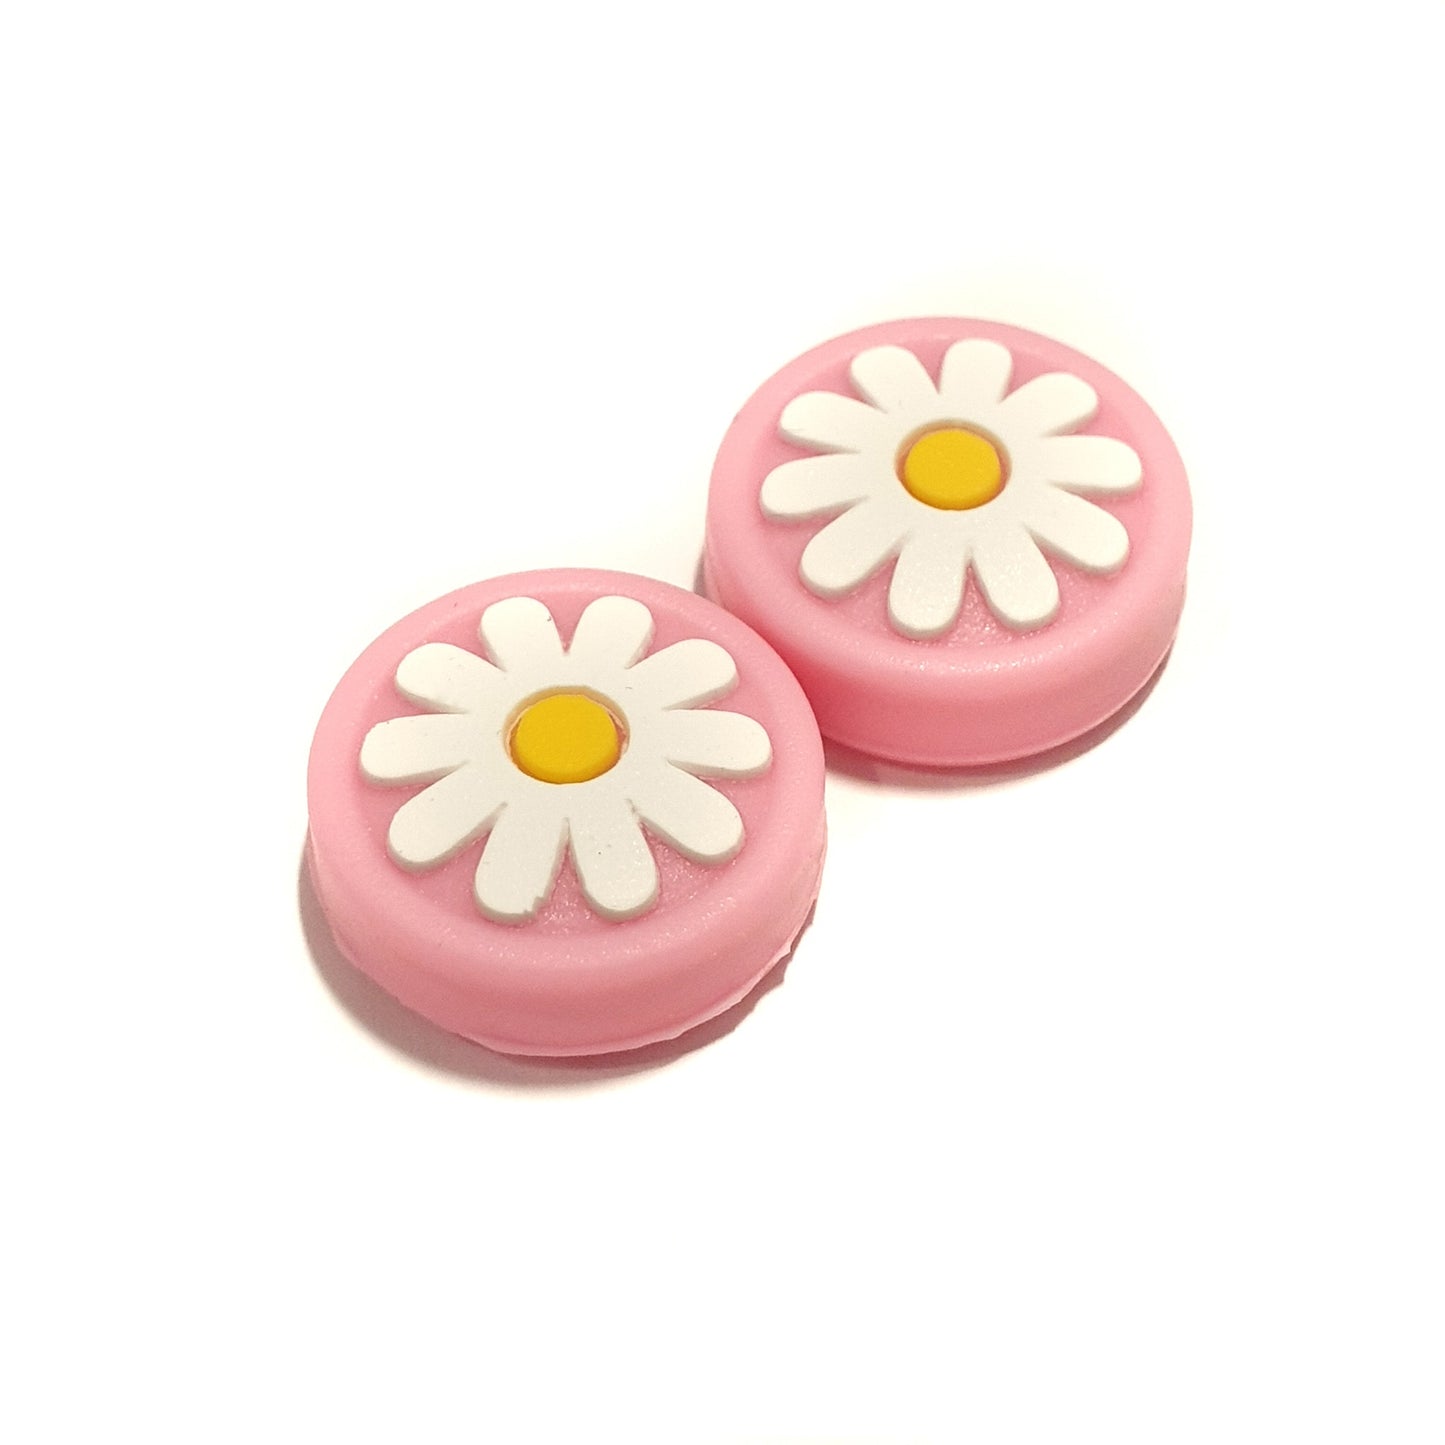 Gaming Thumb Grips | Performance Anti-slip Thumbsticks | Joystick Cap Thumb Grips | Flowers - Pink | Accessories suitable for Nintendo Switch Joy-Con Controllers